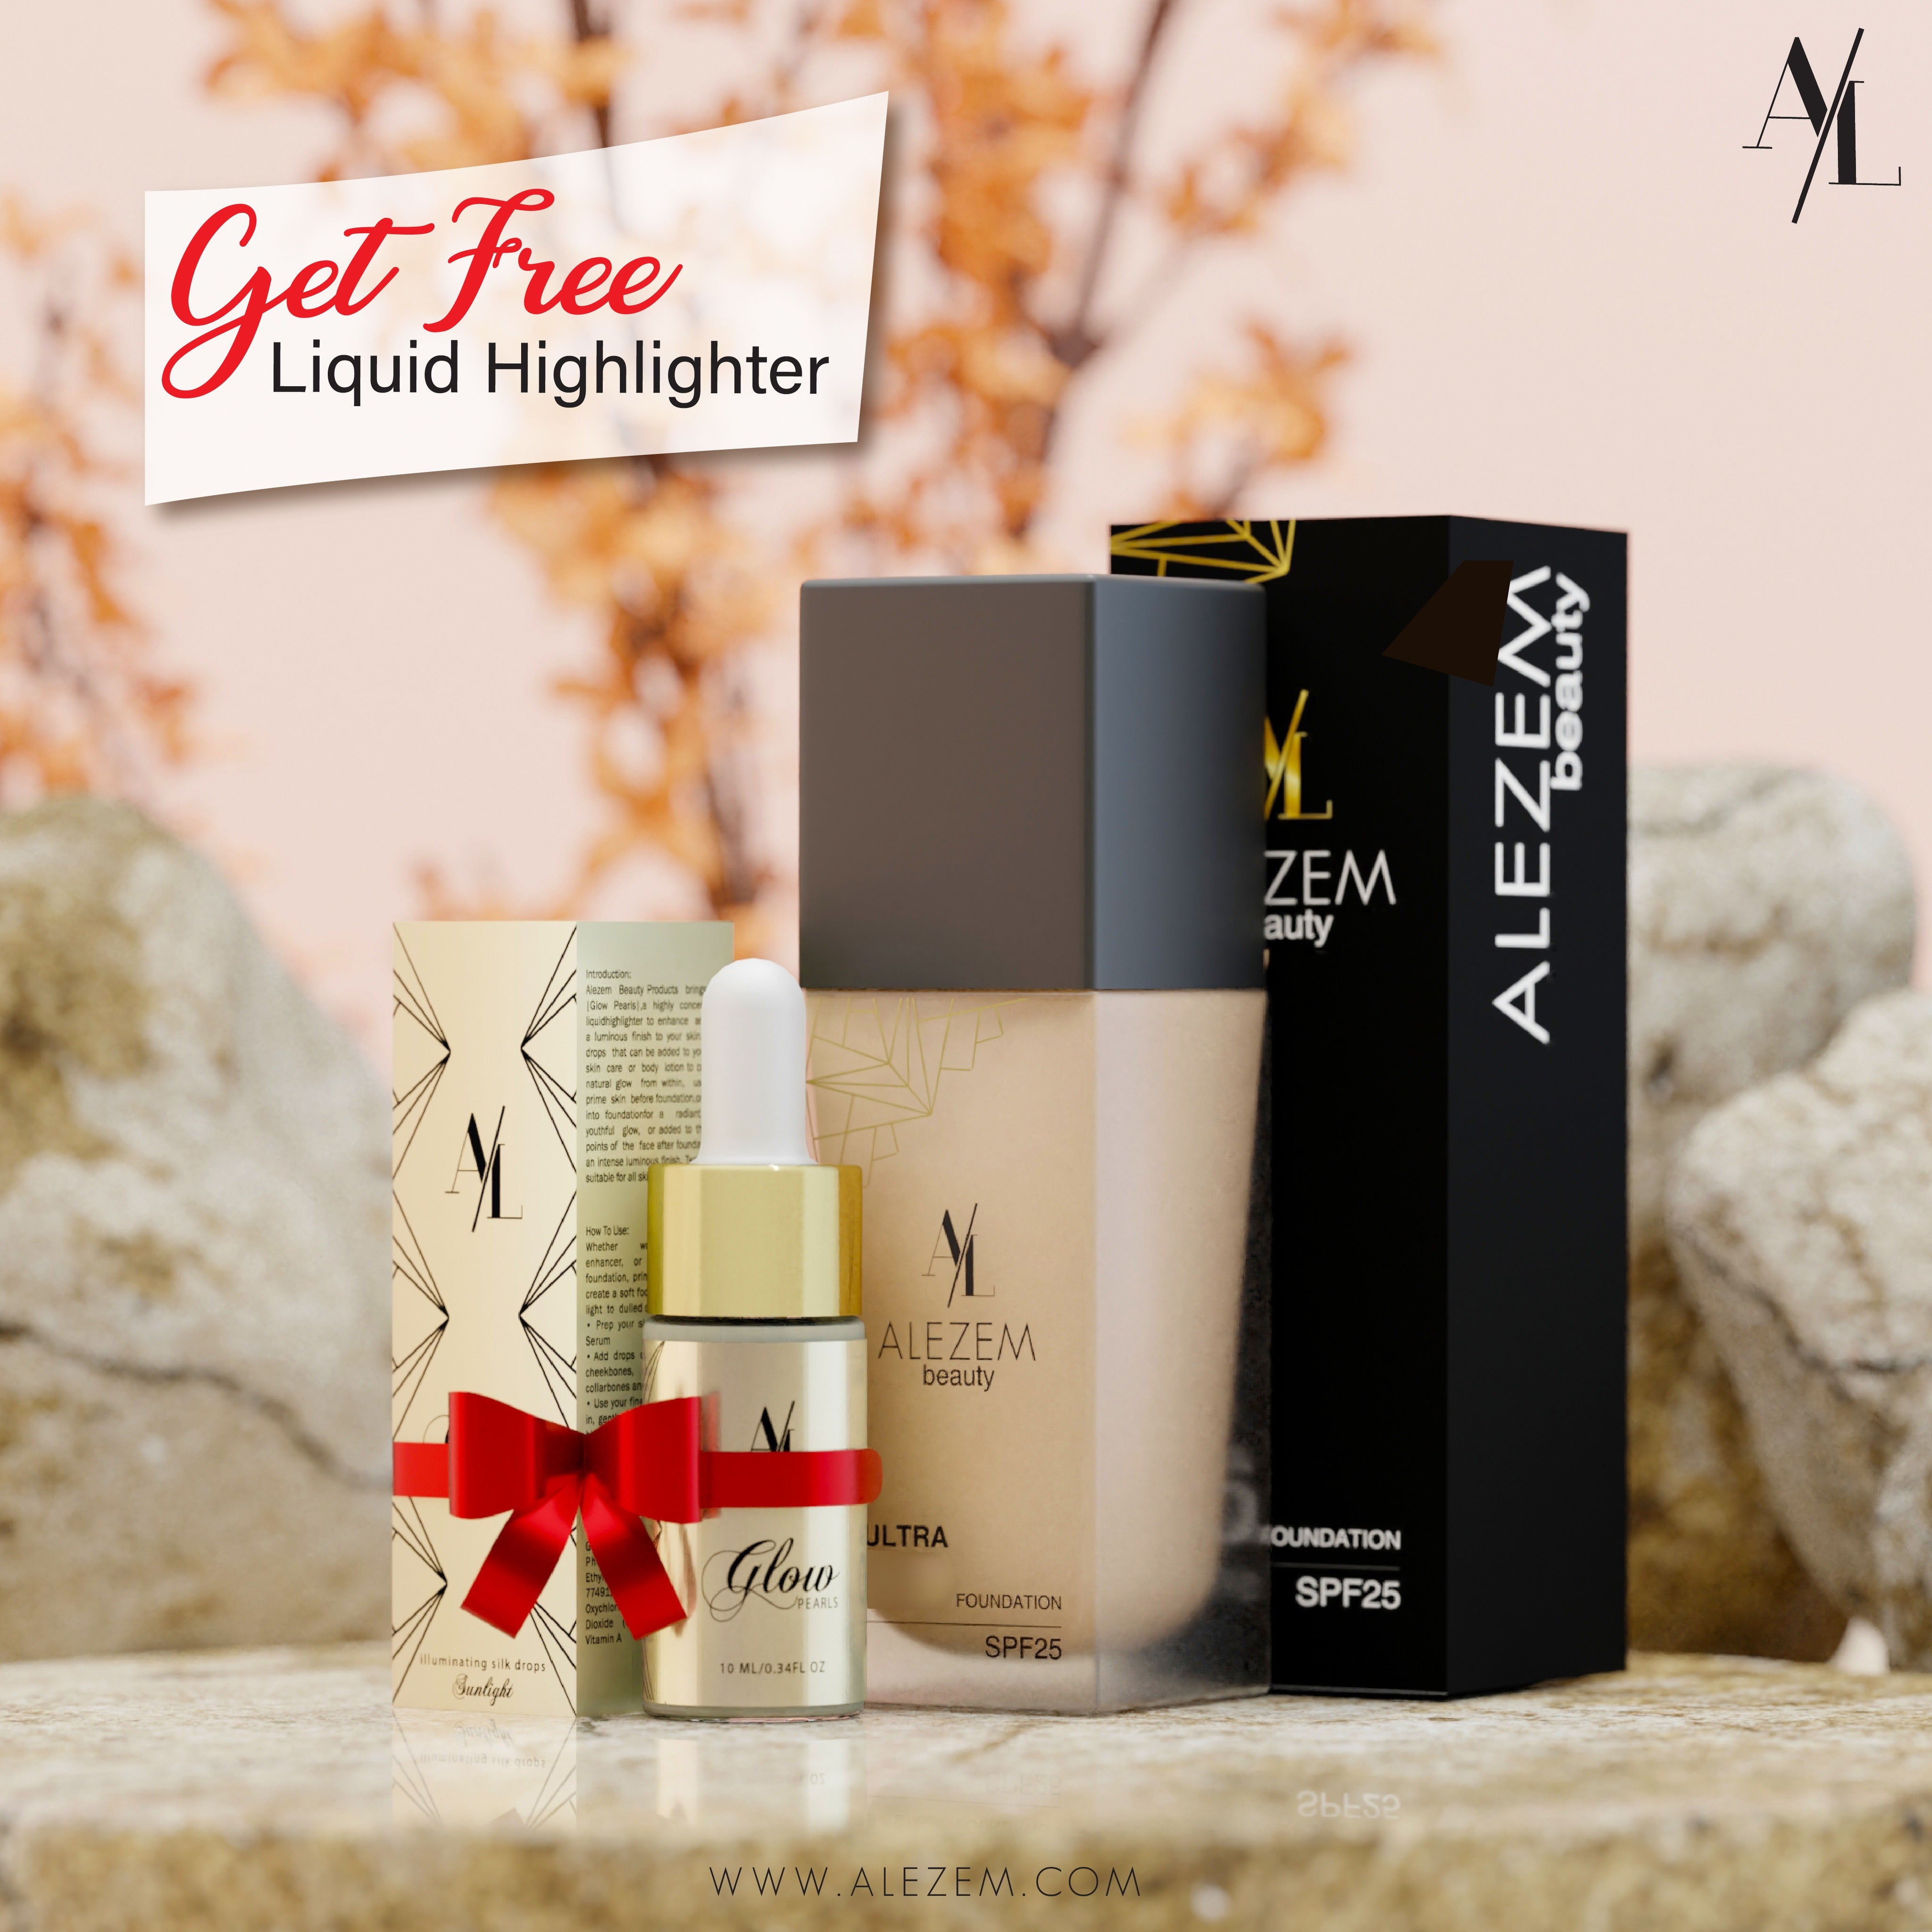 Buy Alezem HD Foundation and Get Free Glow Pearl Liquid Highlighter